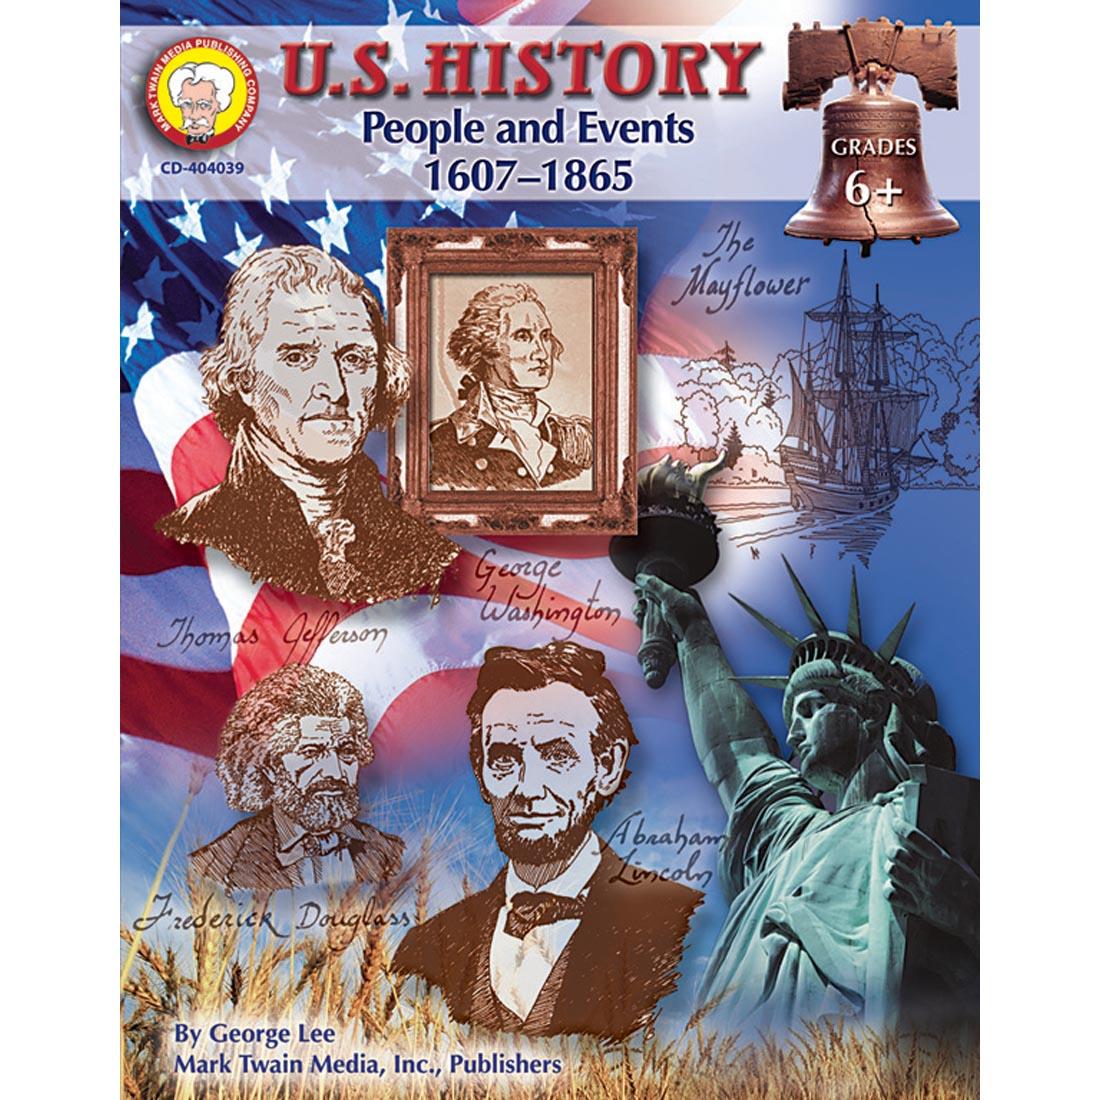 U.S. History People And Events 1607 - 1865 by Carson Dellosa